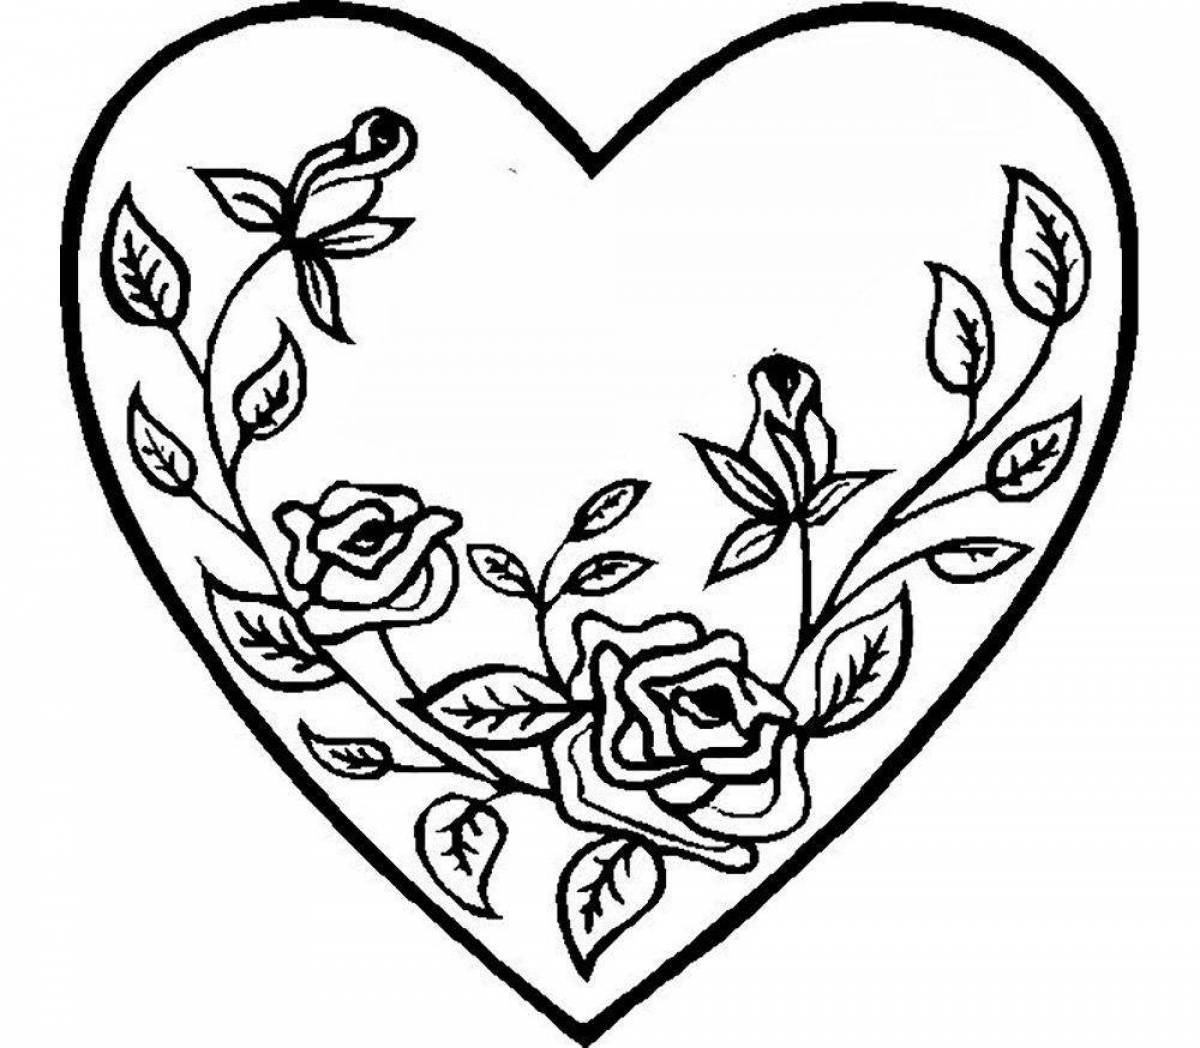 Glowing heart coloring page